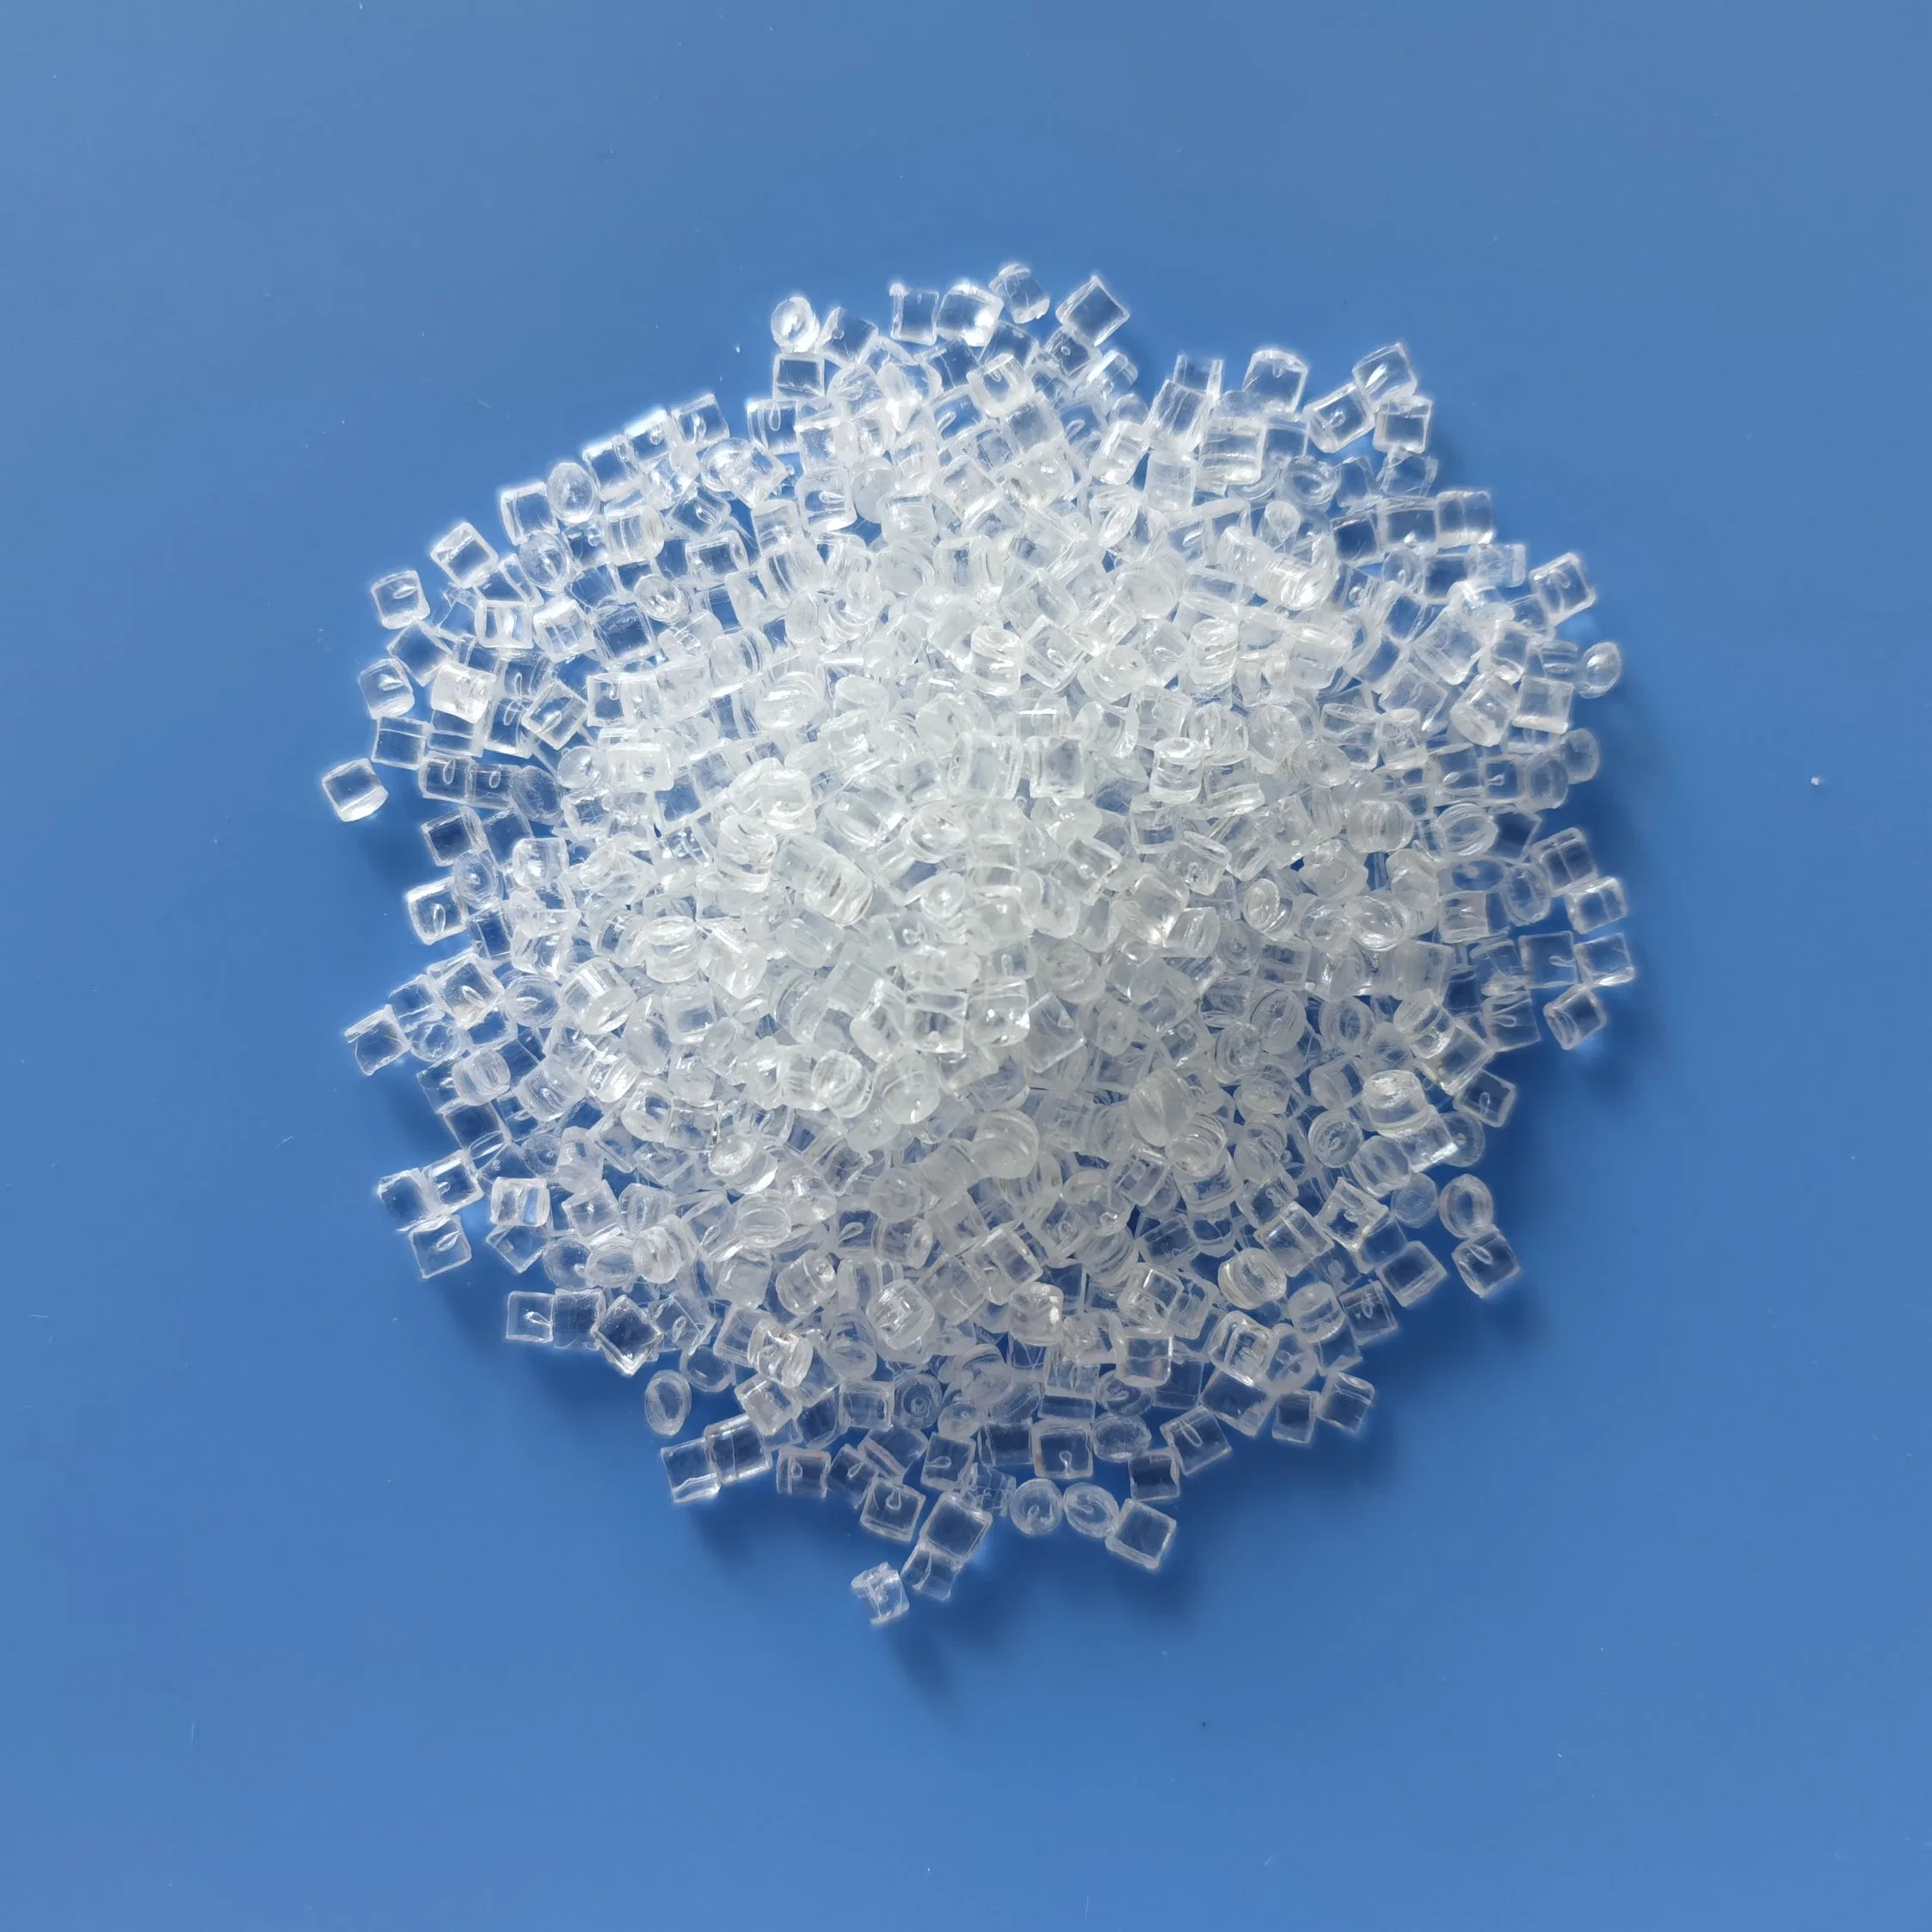 Polystyrene Used for Packaging Disposable Products